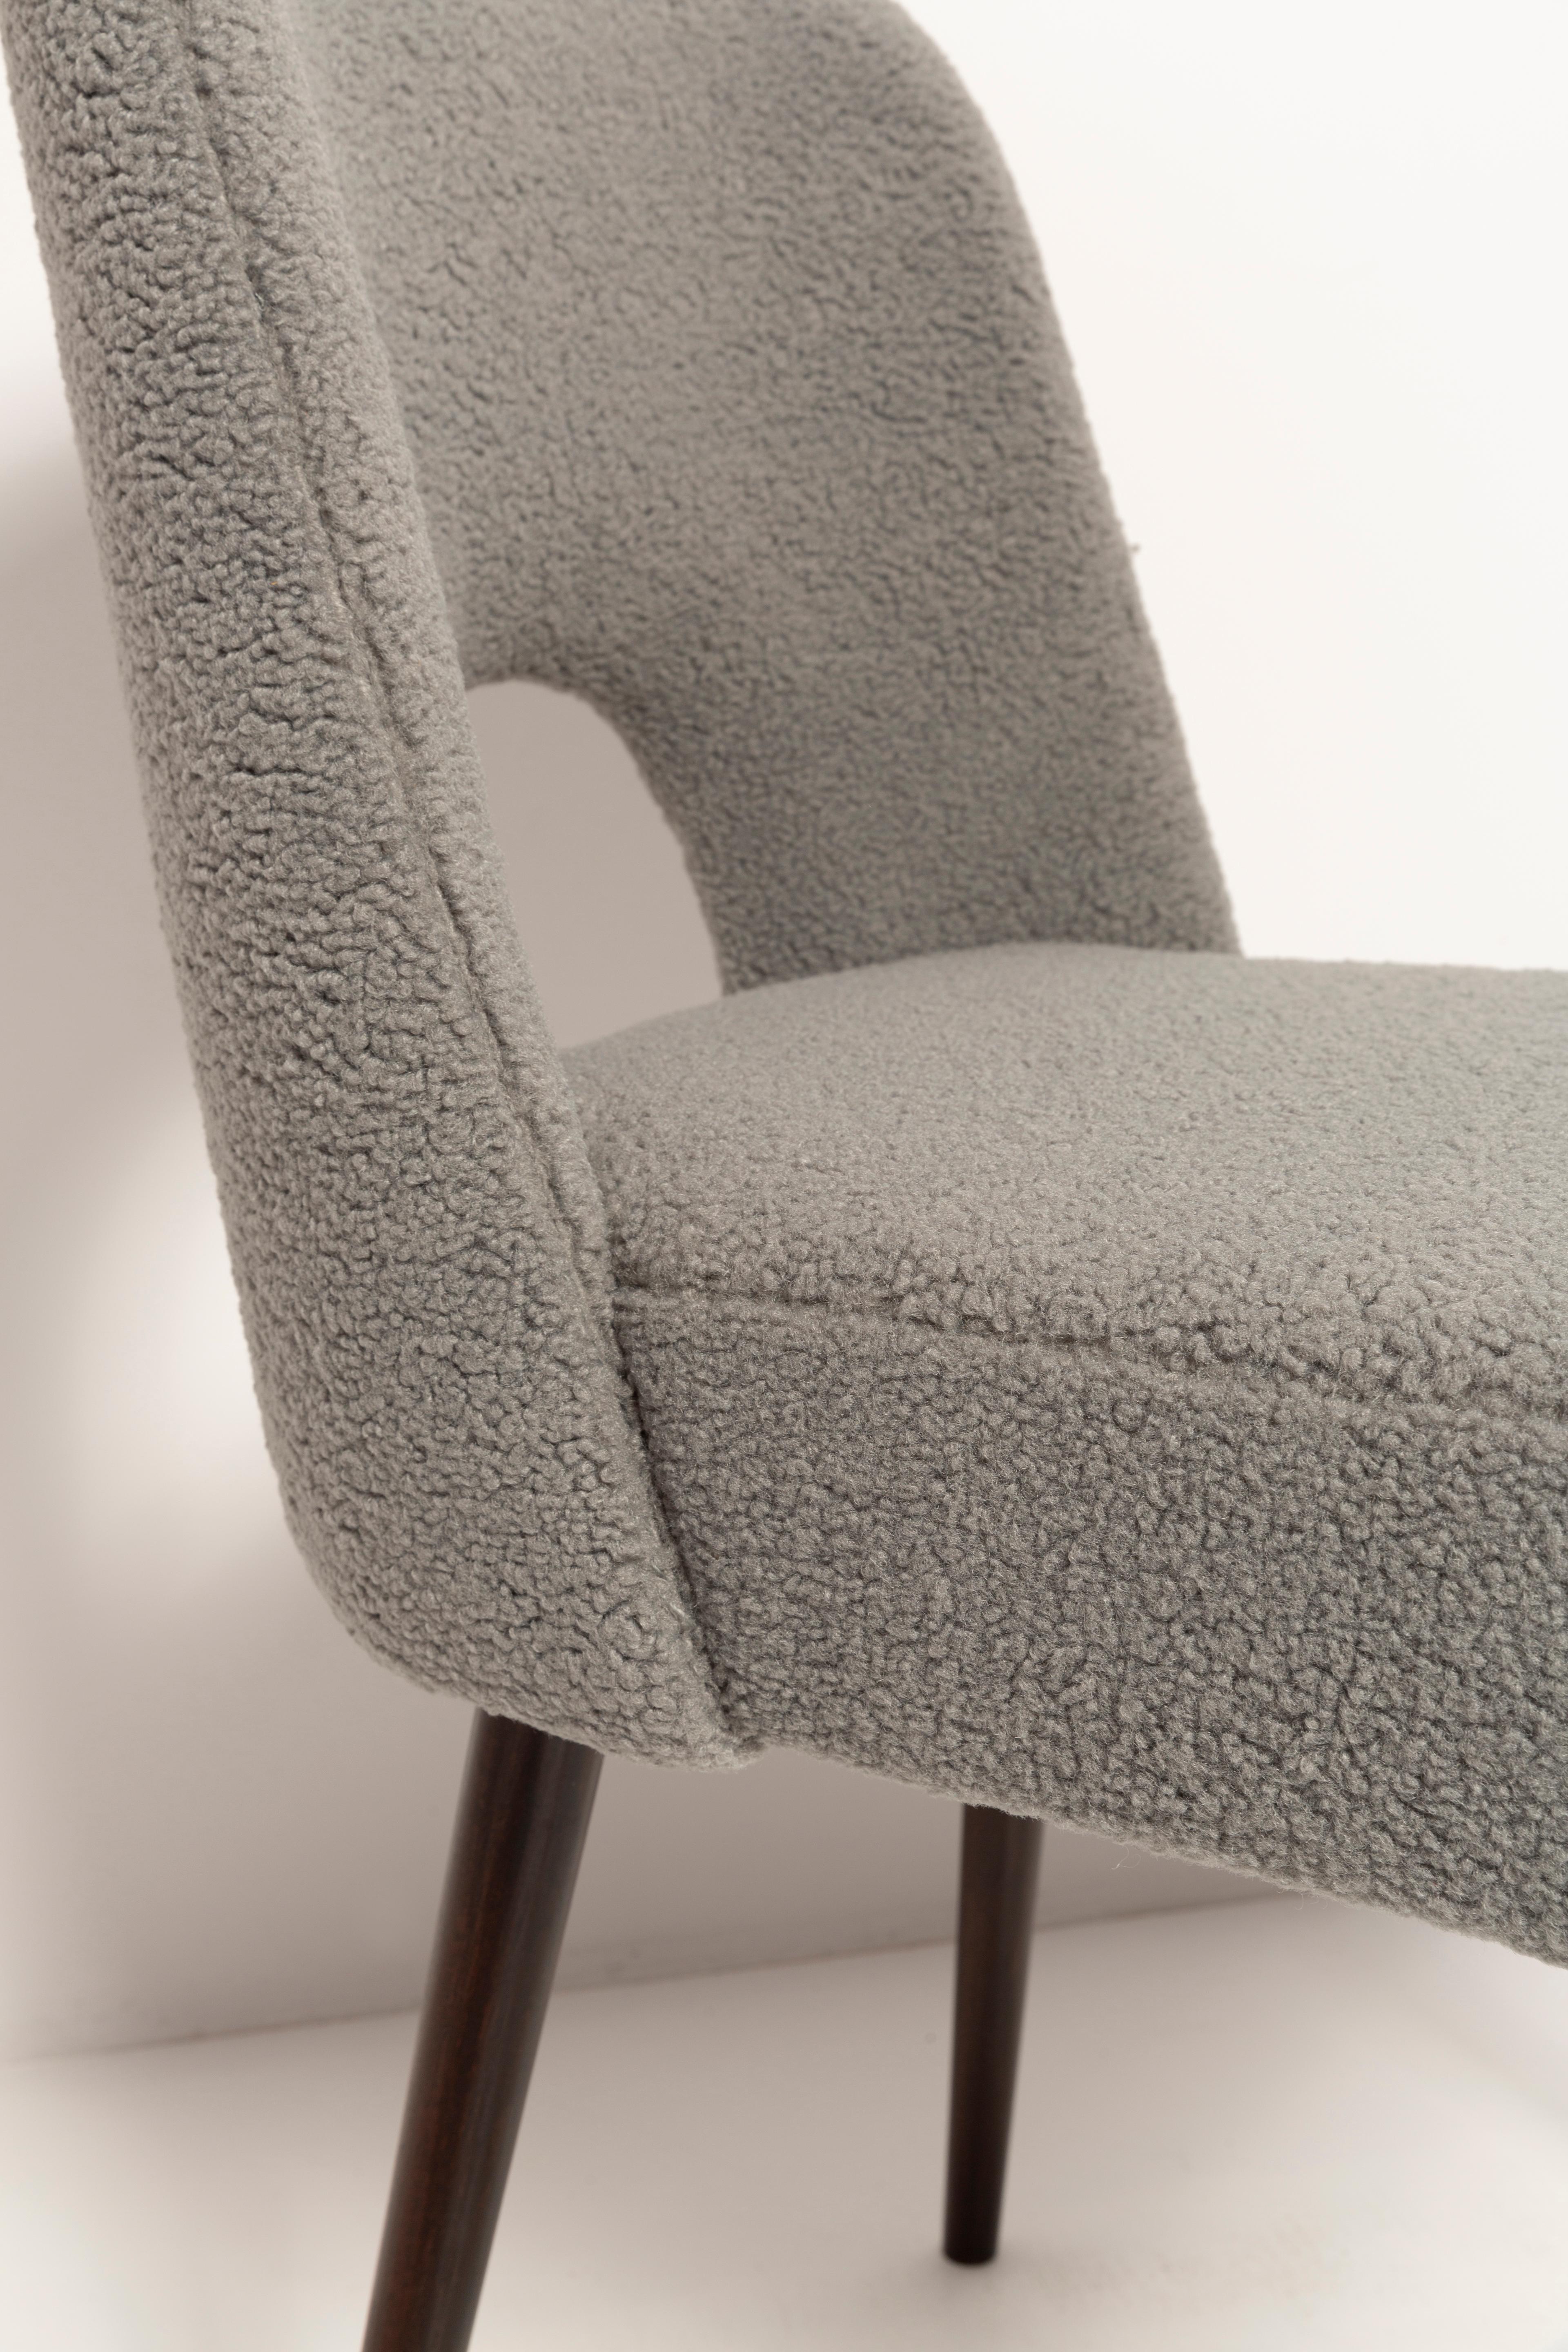 Hand-Crafted Set of Nine Gray Boucle 'Shell' Chairs, Europe, 1960s For Sale